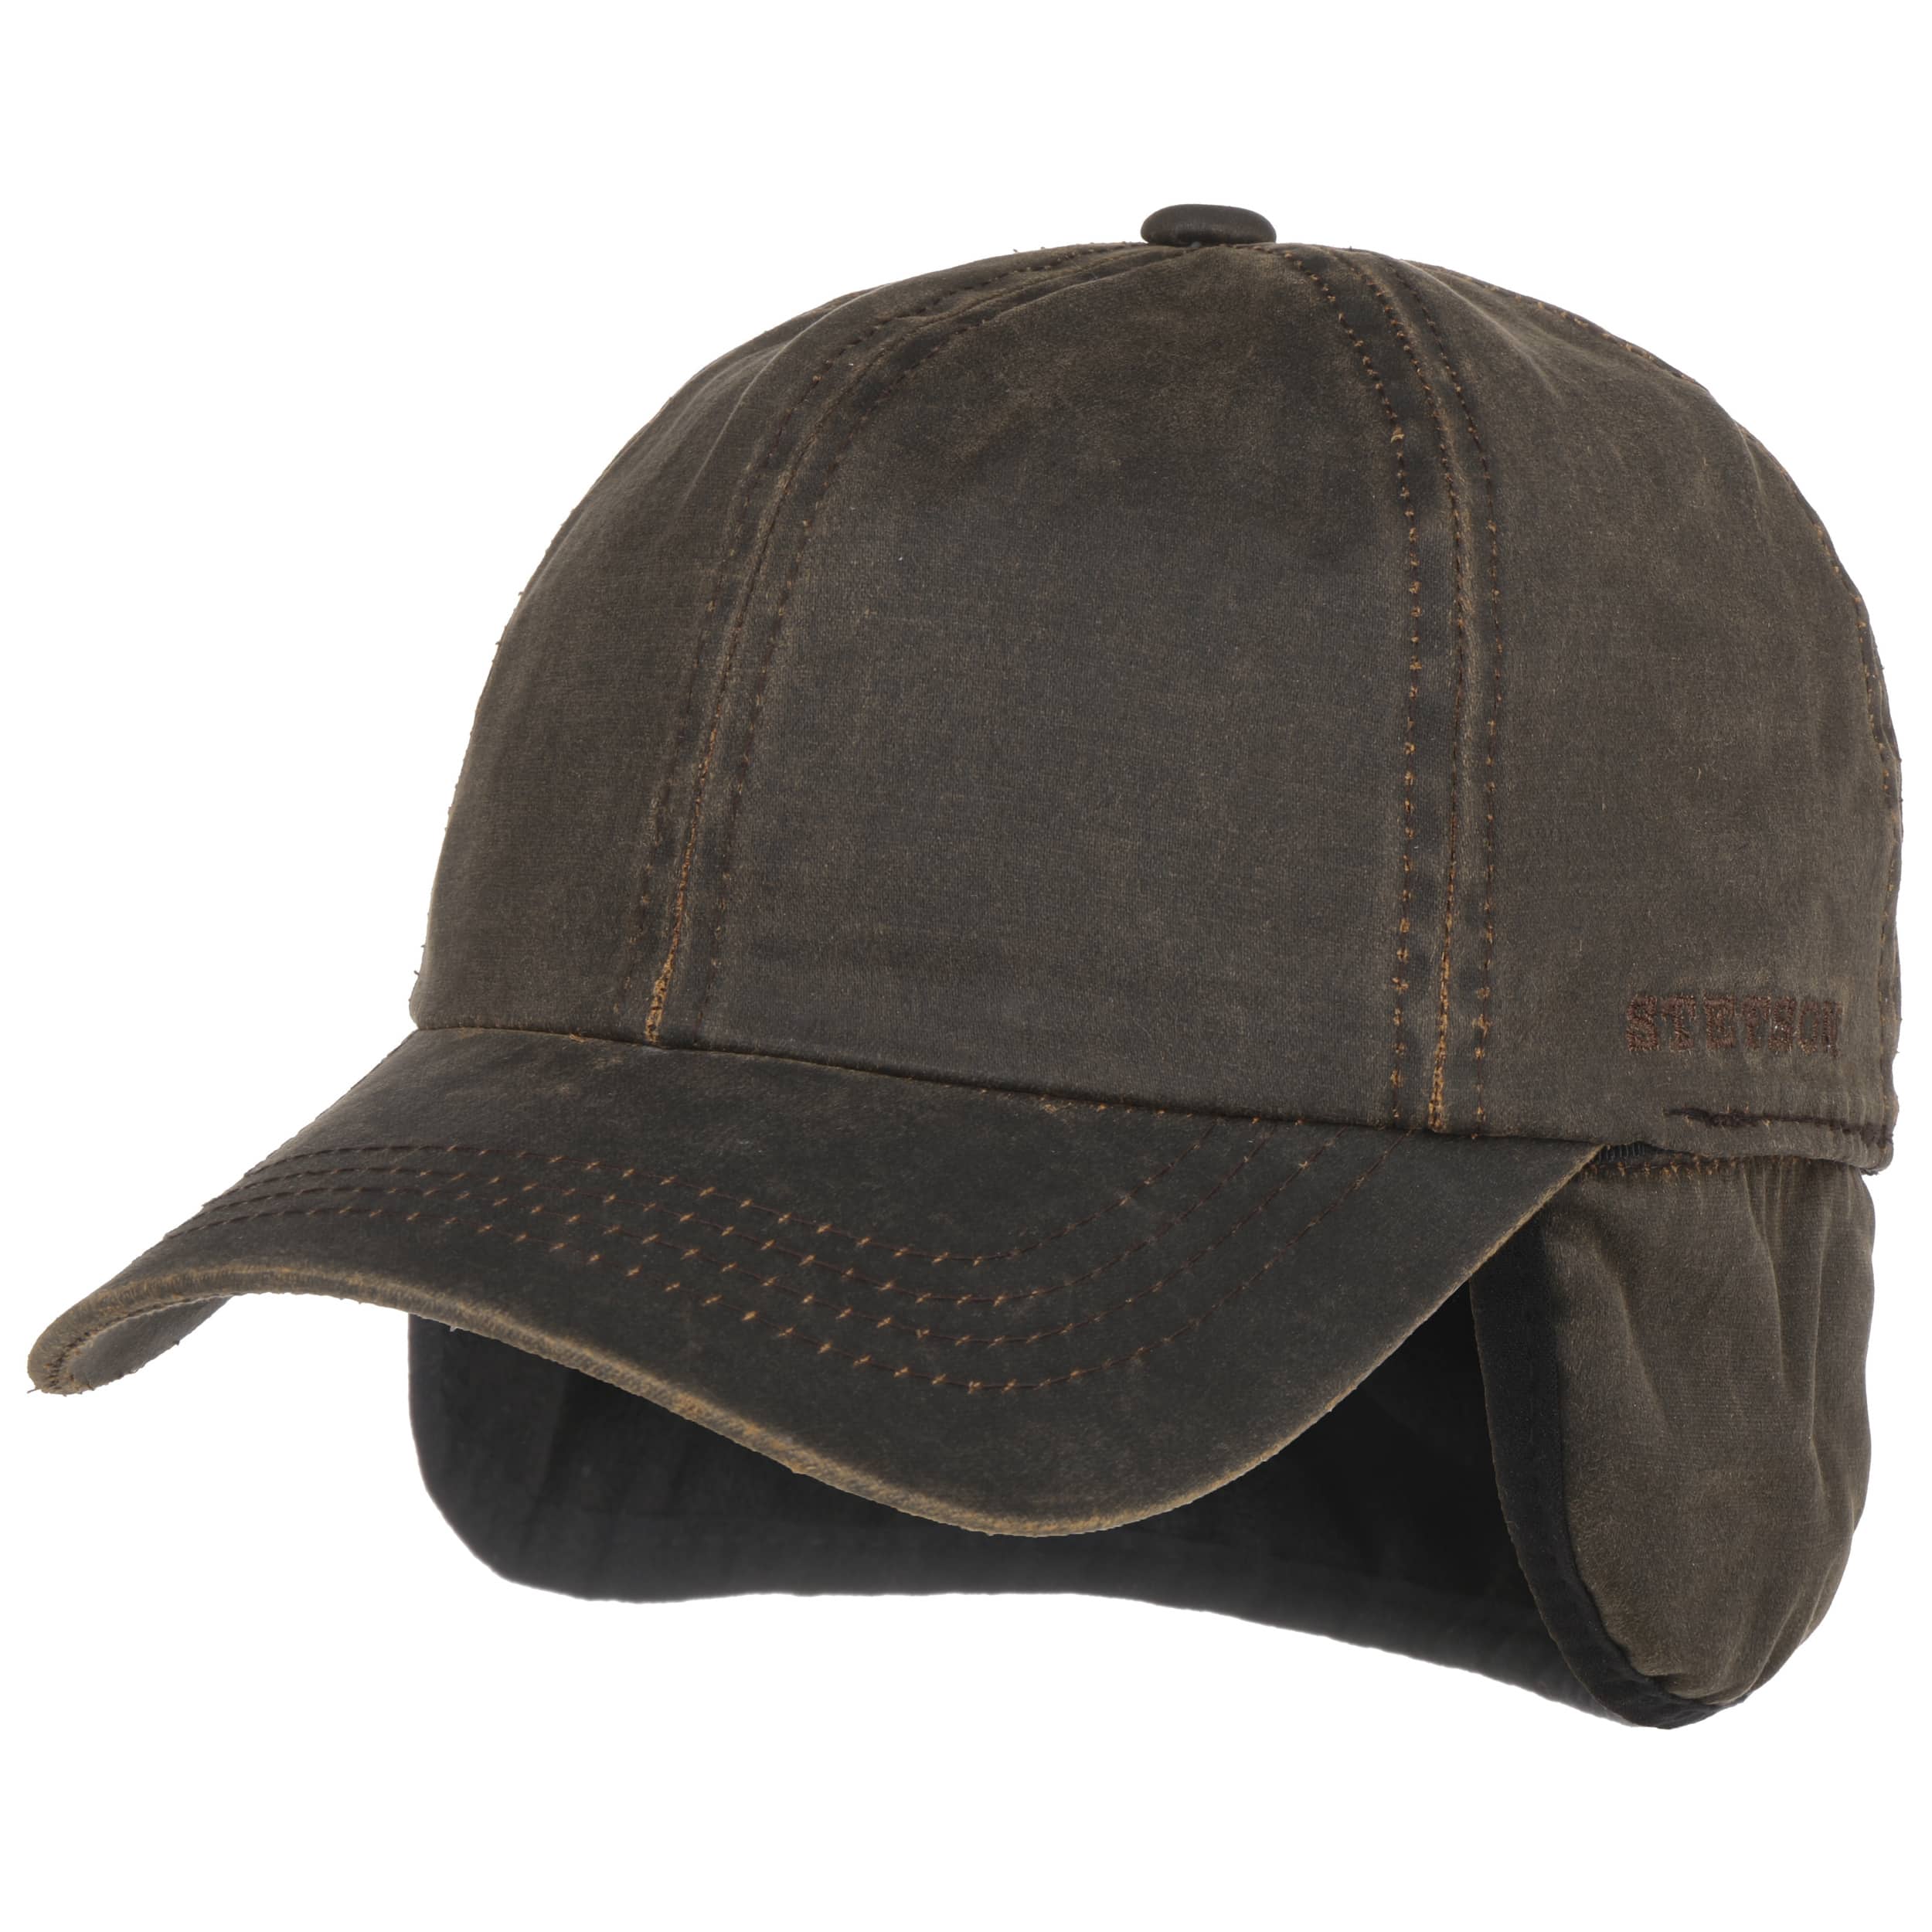 Densey Cap with Ear Flaps by Stetson - 56,80